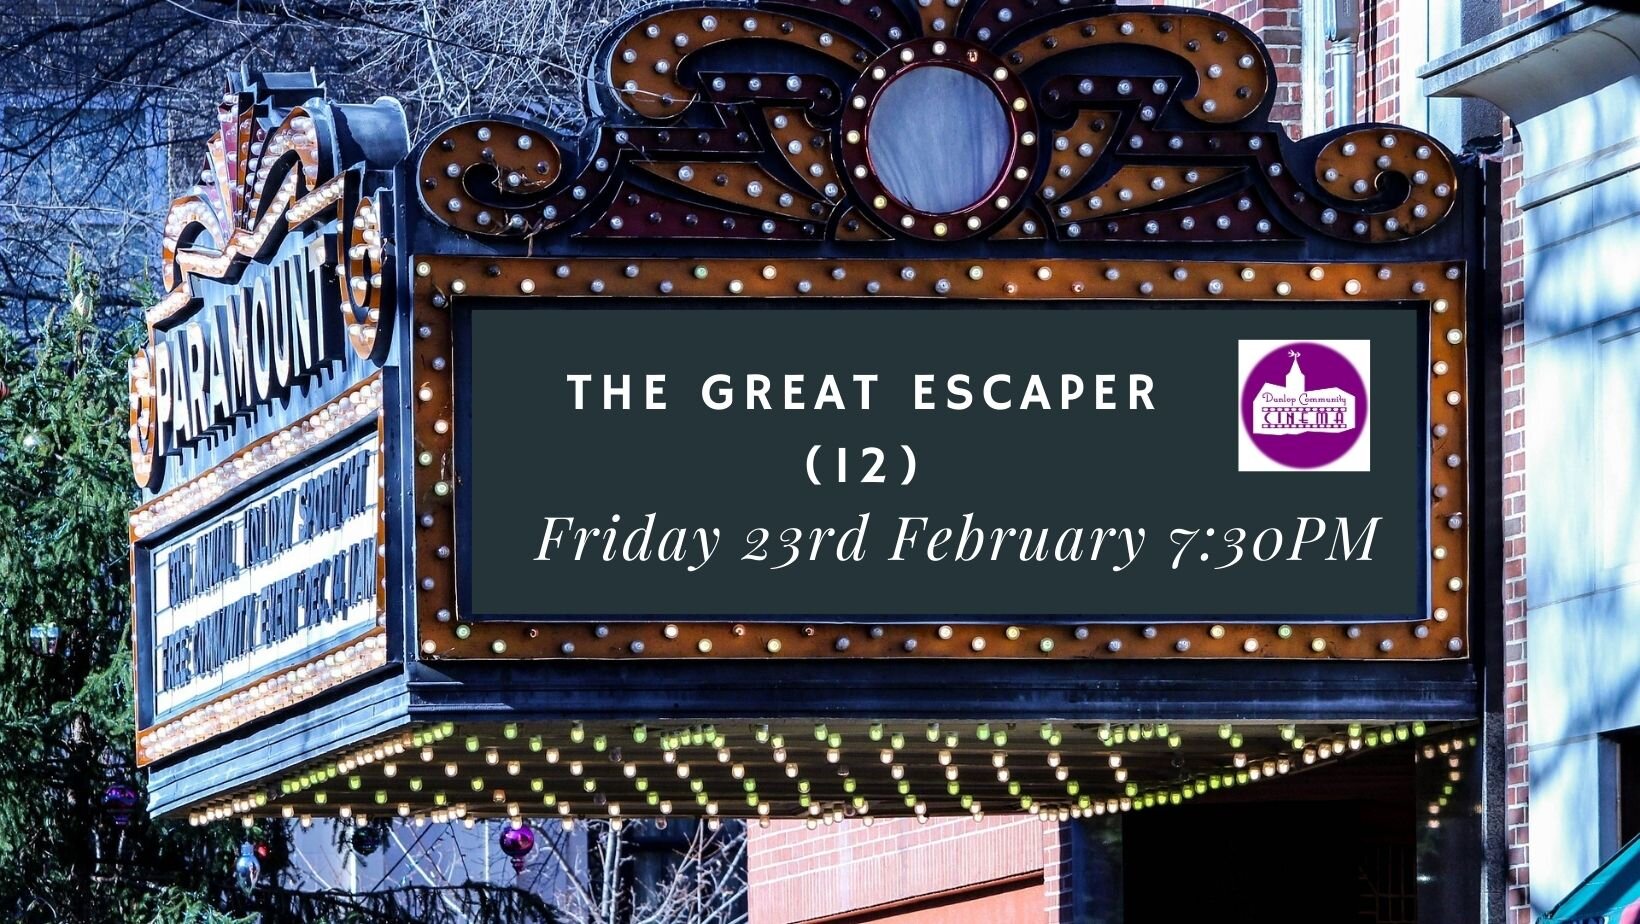 The Great Escaper (12) | Friday 23rd February | 7:30PM